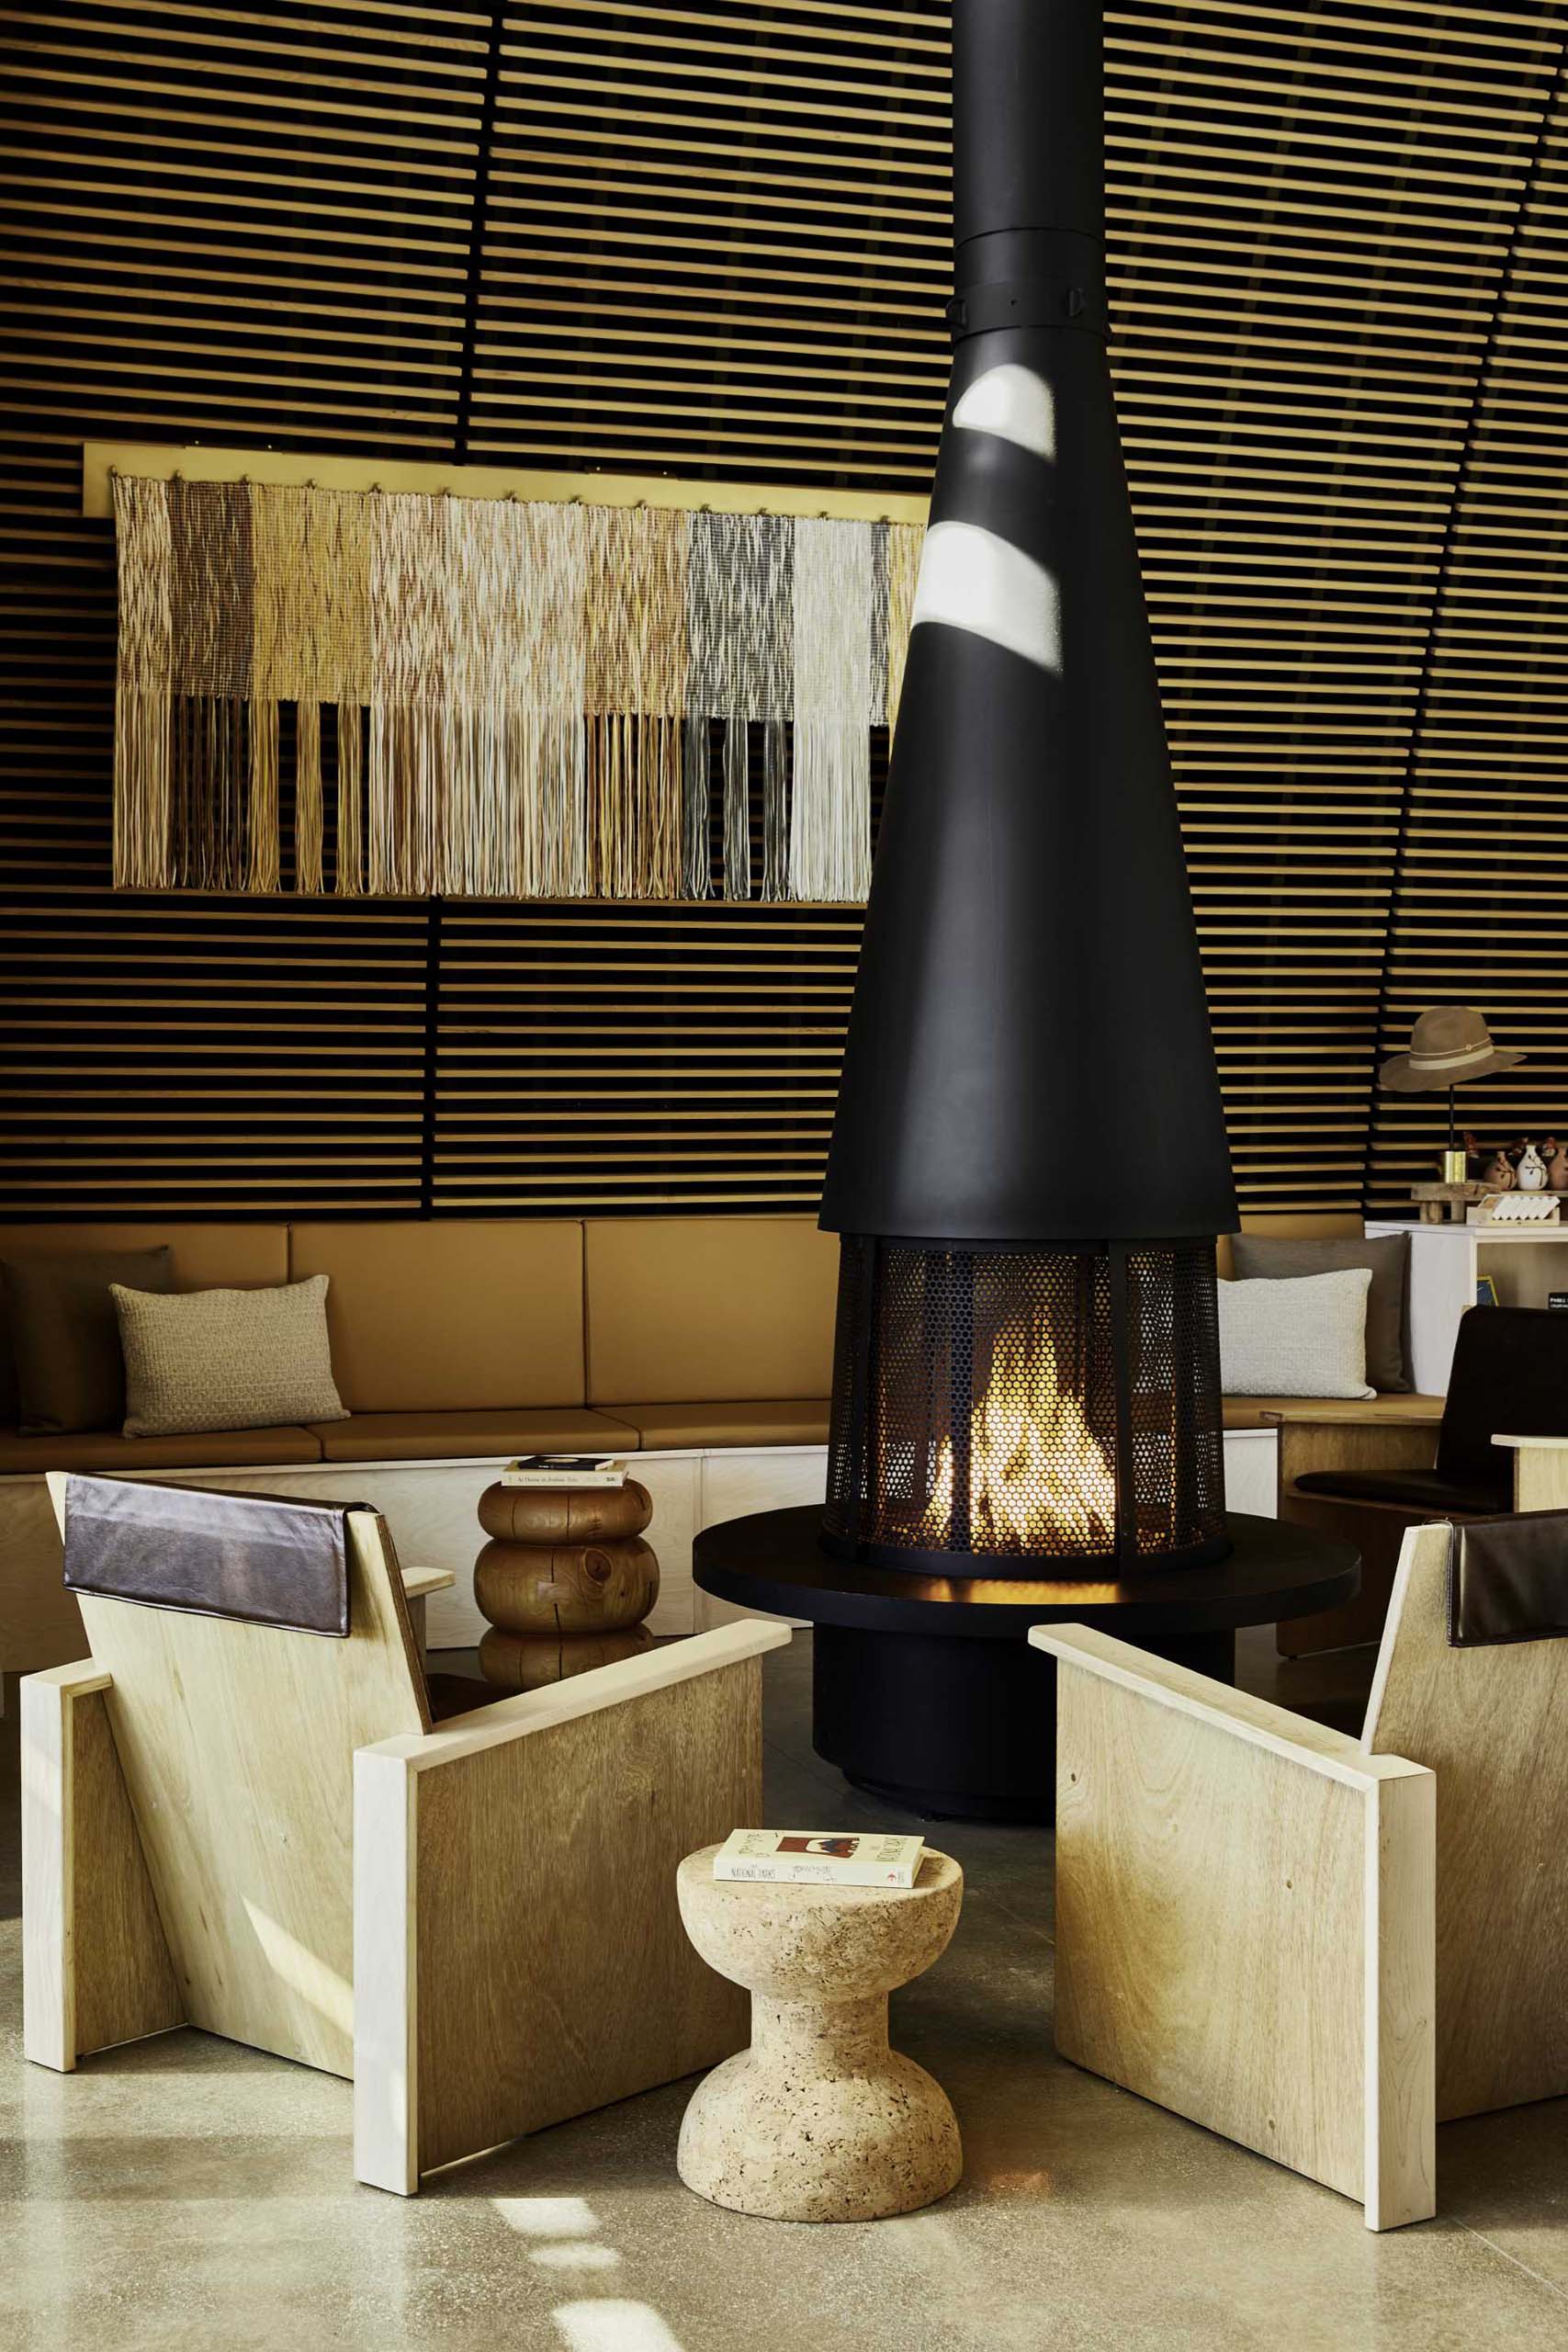 A modern black fireplace and surrounding seating within a clubhouse.